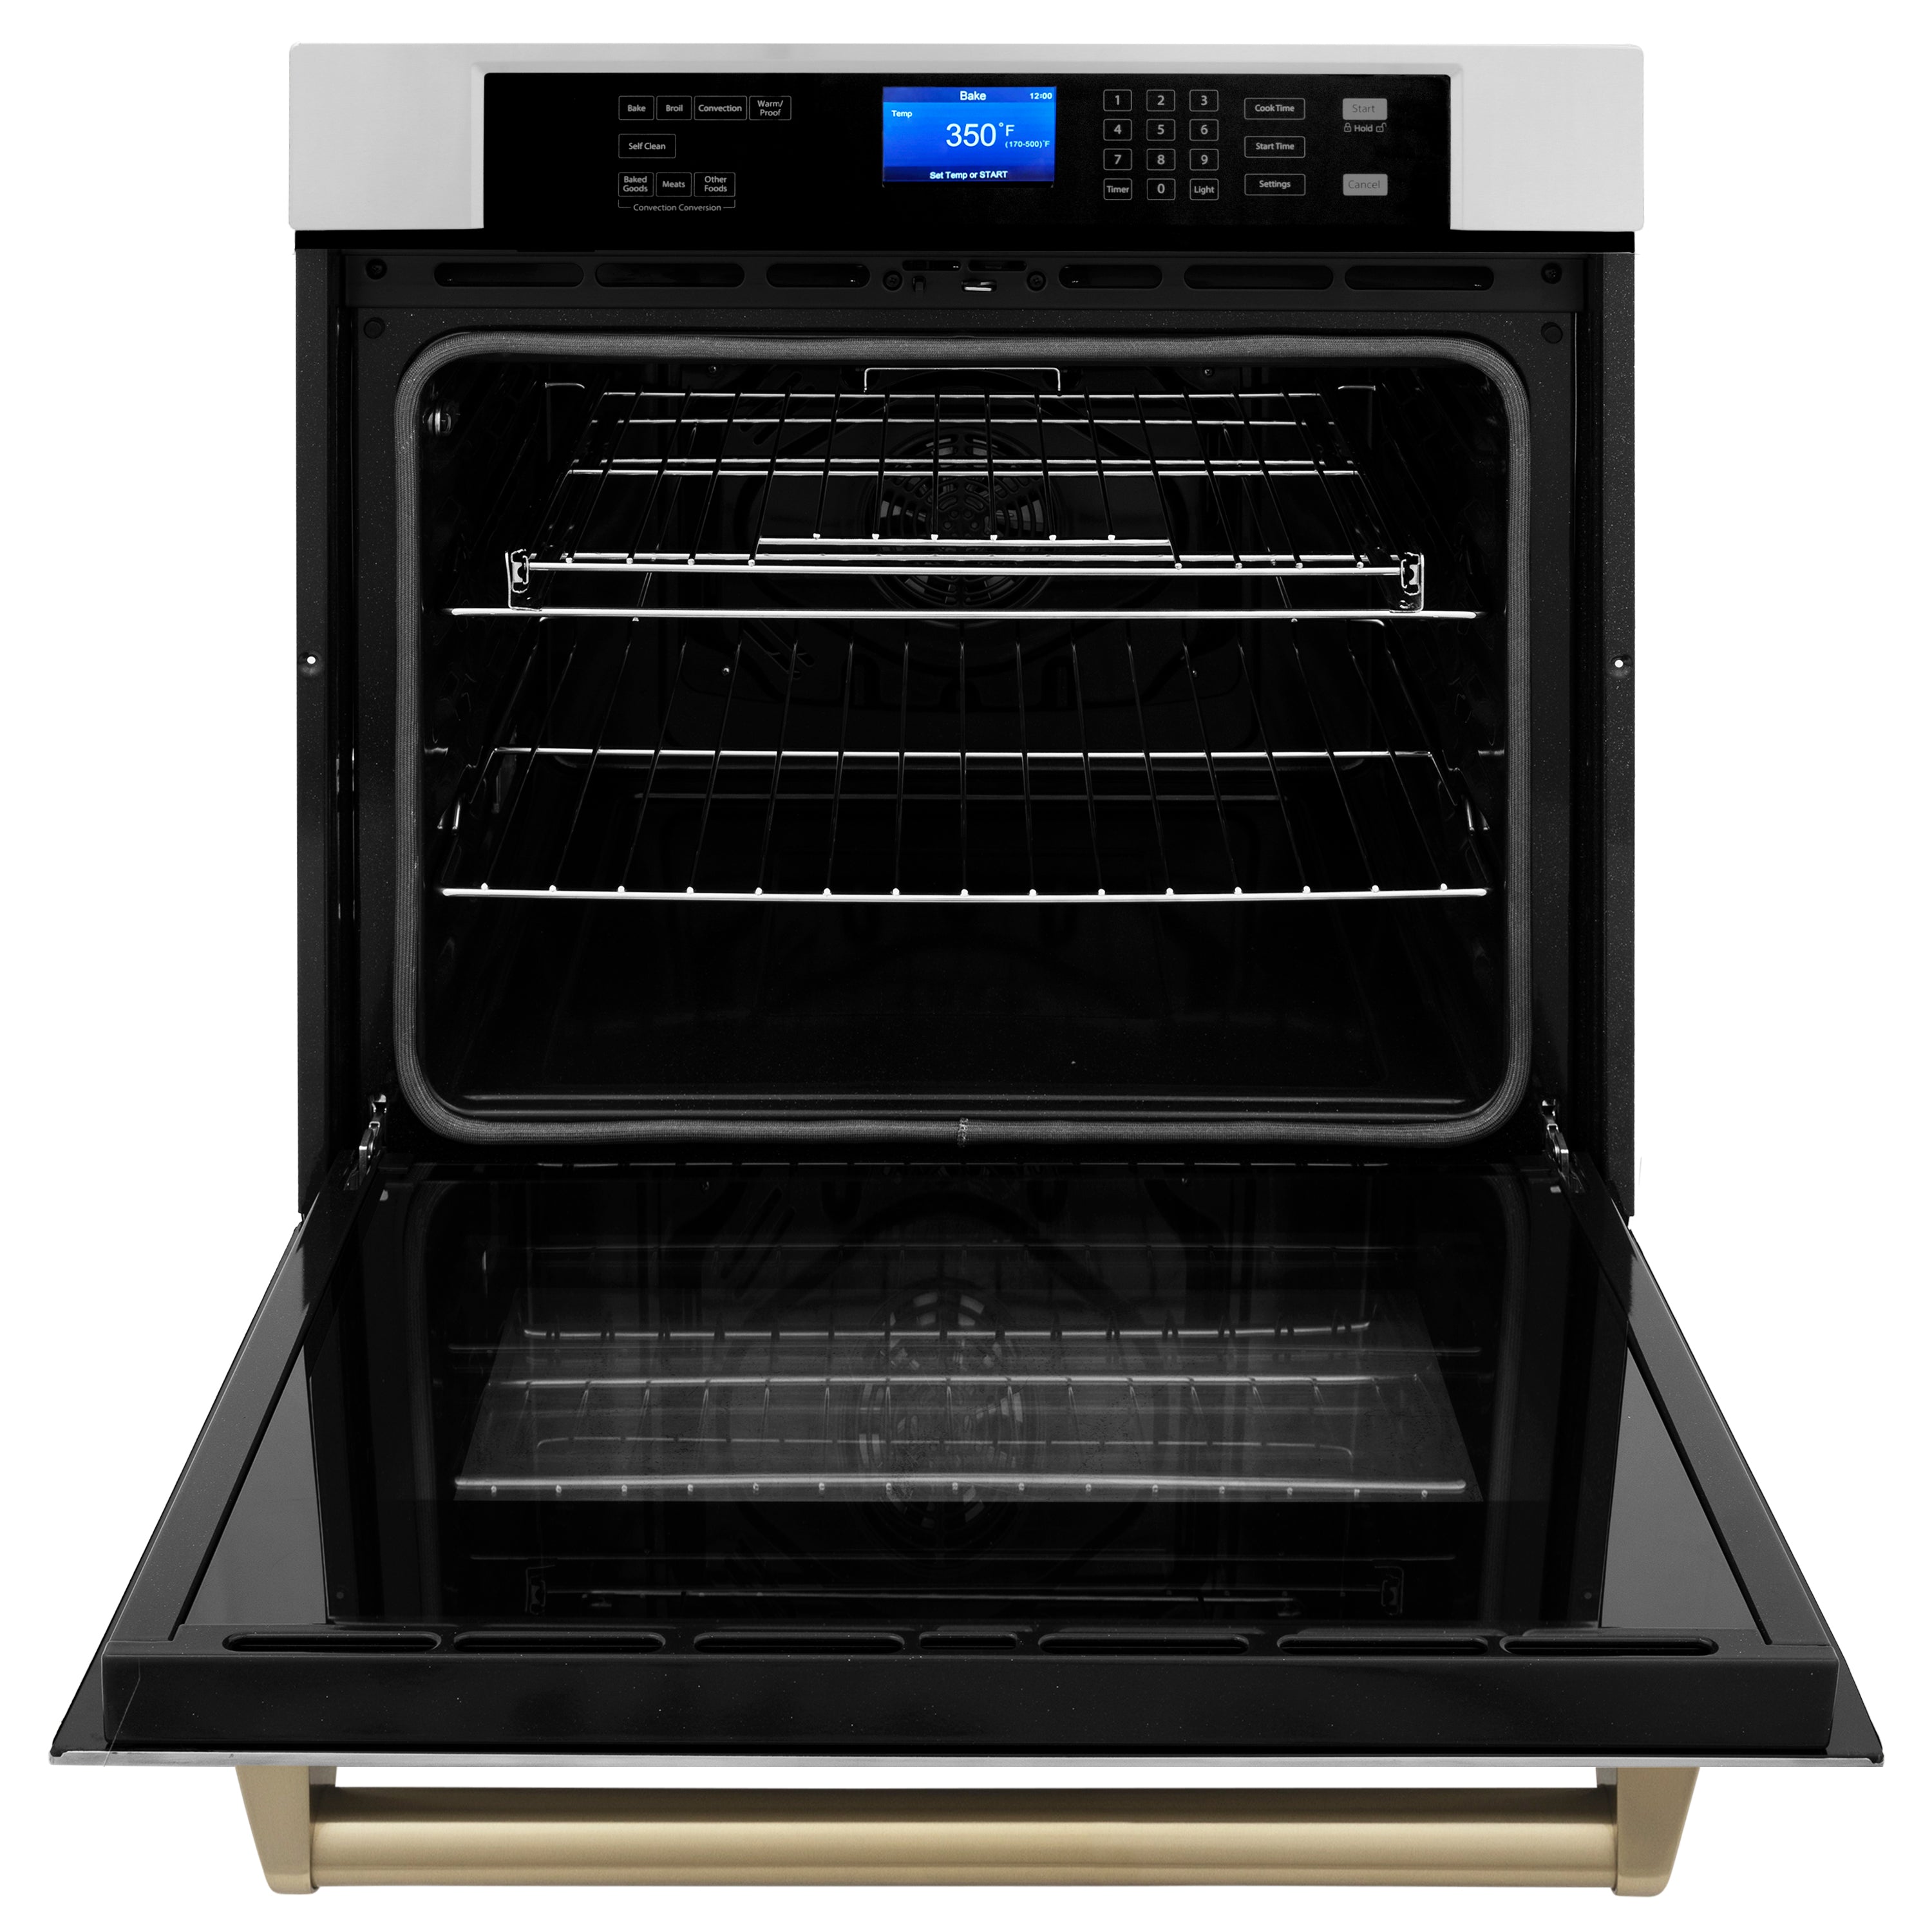 ZLINE 30" Autograph Edition Single Wall Oven with Self Clean and True Convection in Stainless Steel and Champagne Bronze (AWSZ-30-CB)